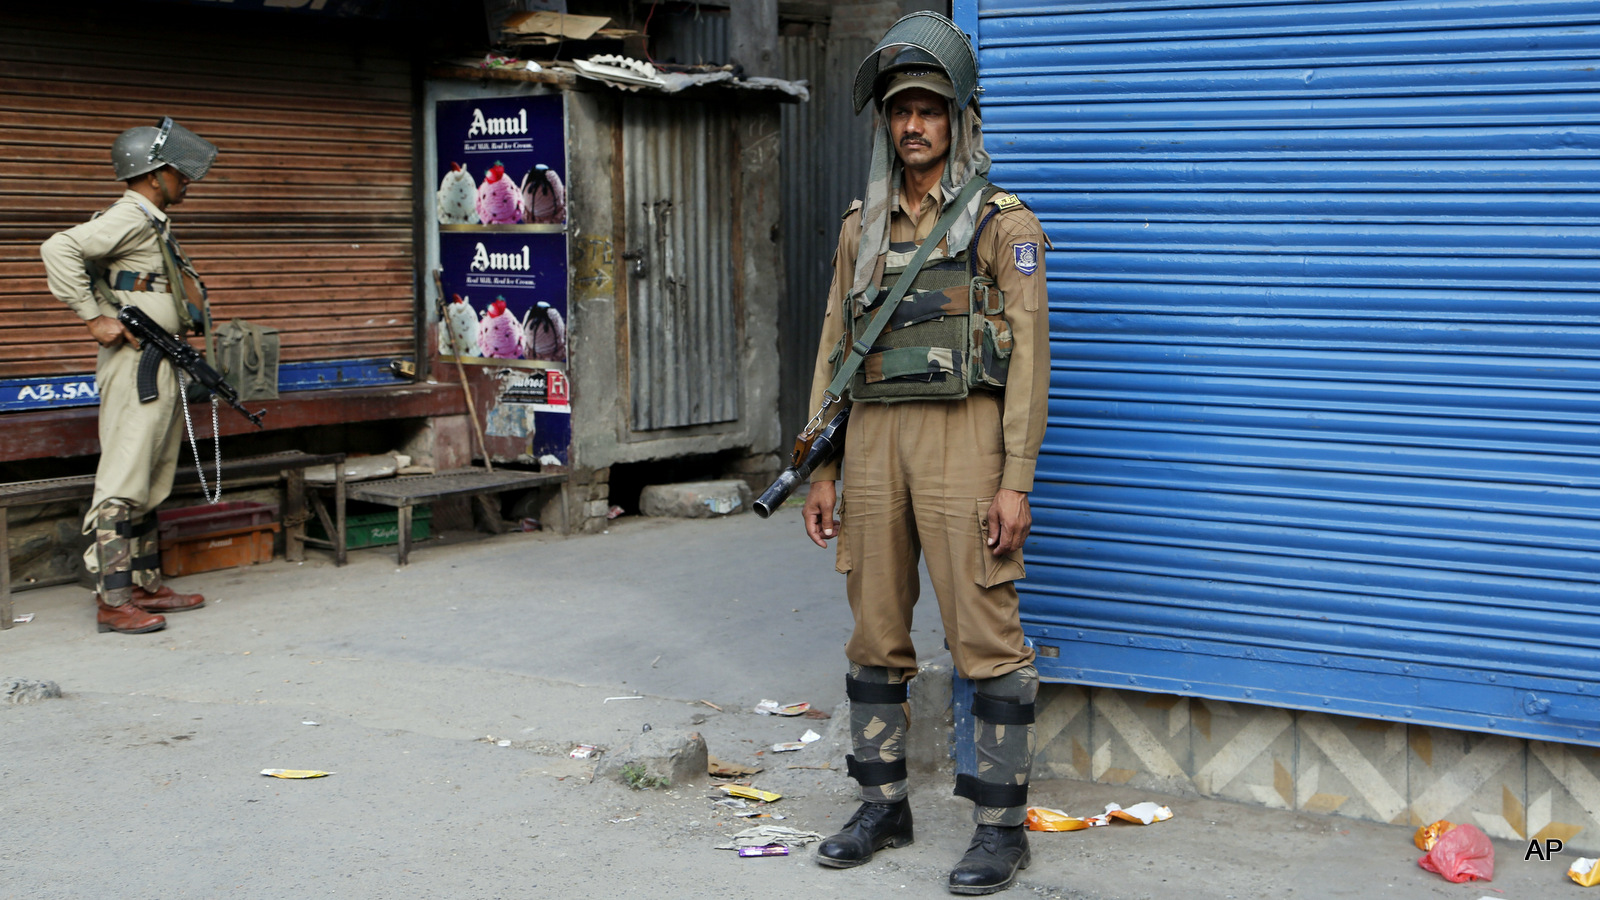 Indian paramilitary police stand guard during curfew in Srinagar, Indian occupied Kashmir, Wednesday, July 13, 2016.